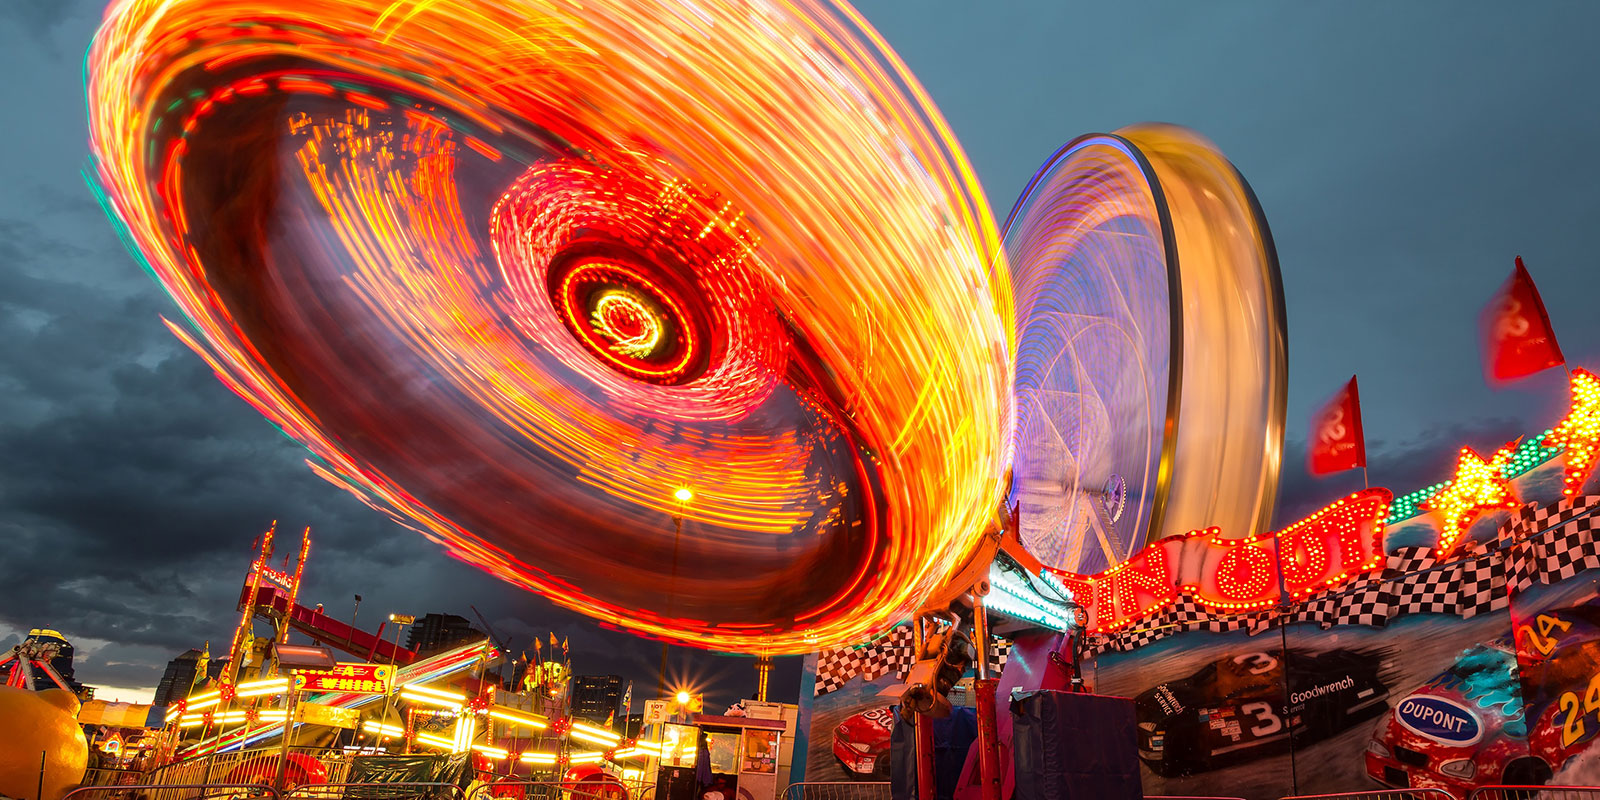 Time lapse photography of an amusement park at night with bright lights to illustrate speed associated with The Nano Sprint